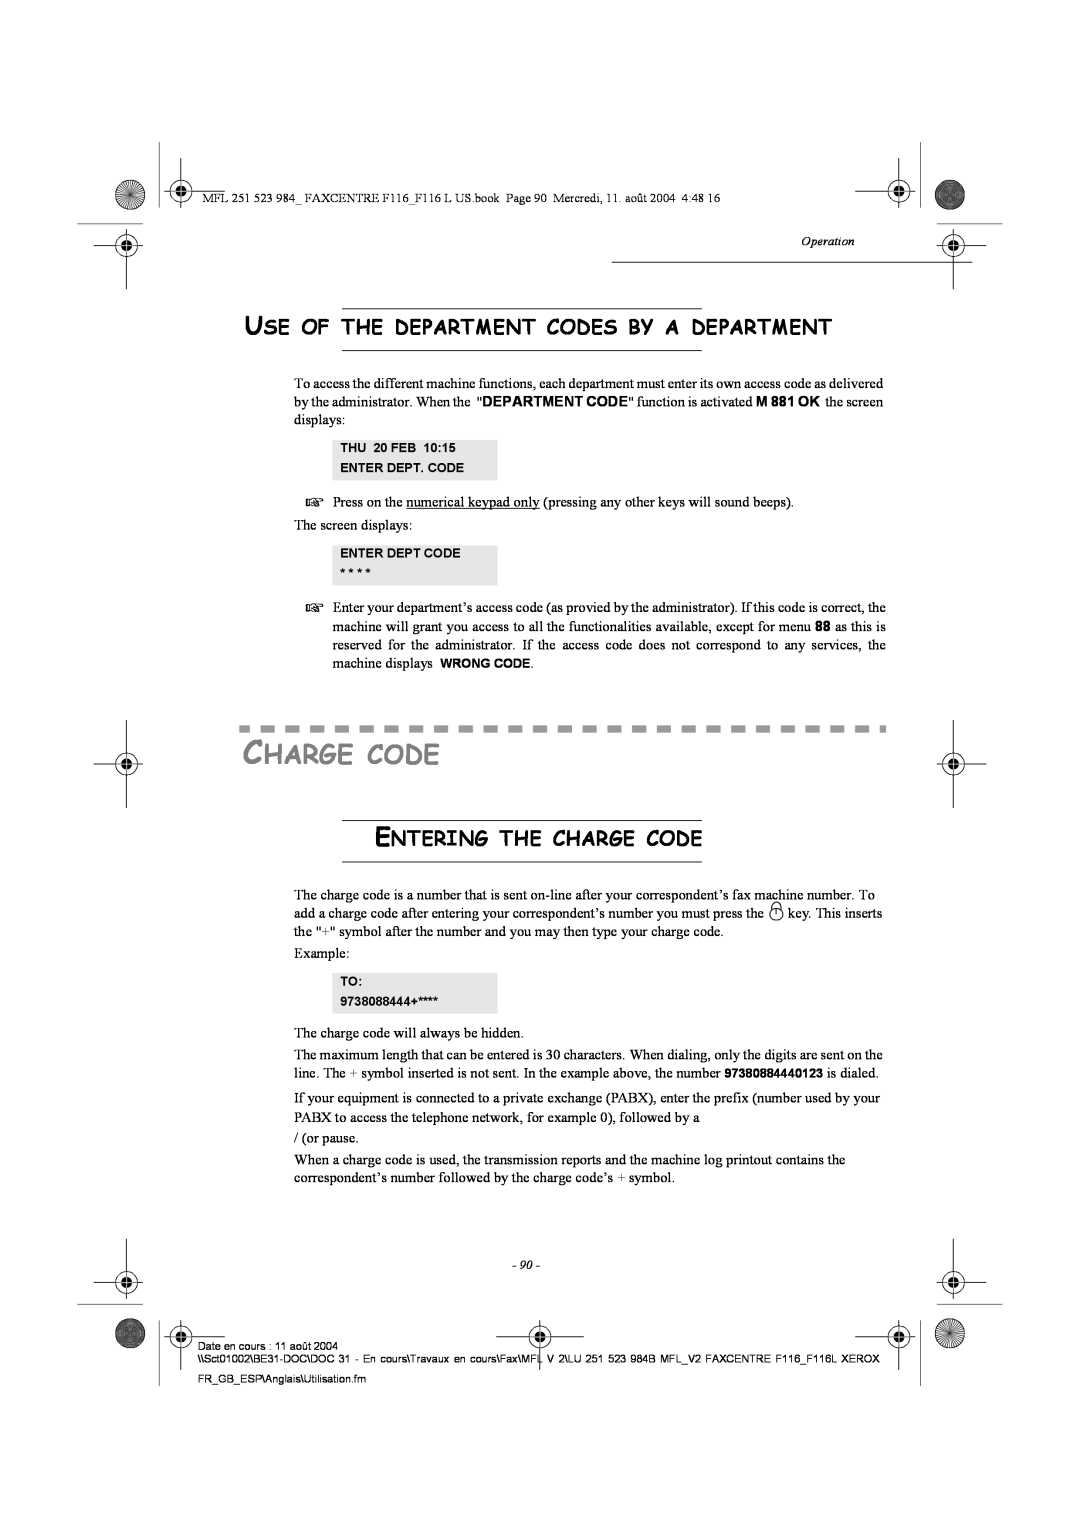 Xerox F116 user manual Use Of The Department Codes By A Department, Entering The Charge Code 